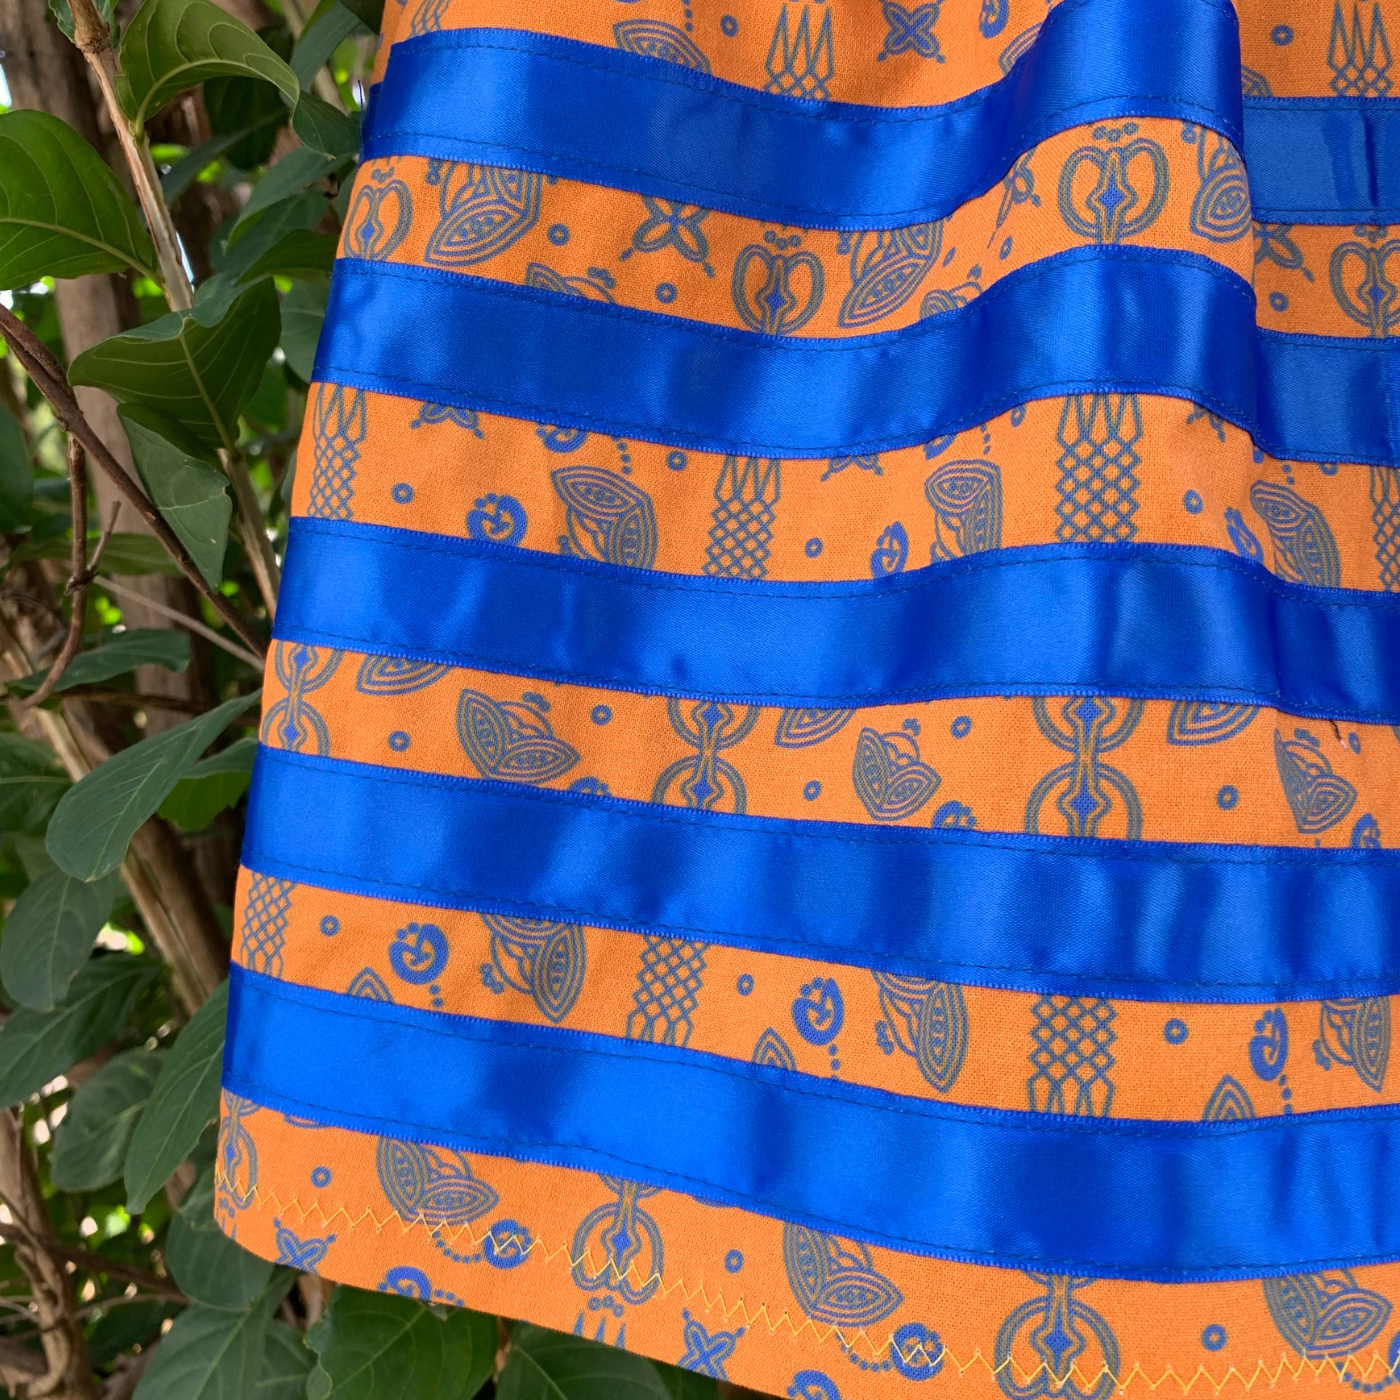 A close up of a ribbon skirt with Jessica's Floral Sunset Gold/Royal design and royal blue ribbons in alternating horizontal stripes. This design has an orange base with small-scale graphic icons in royal blue. The pattern creates vertical lines across the width of the fabric by the way the elements of design are positioned.